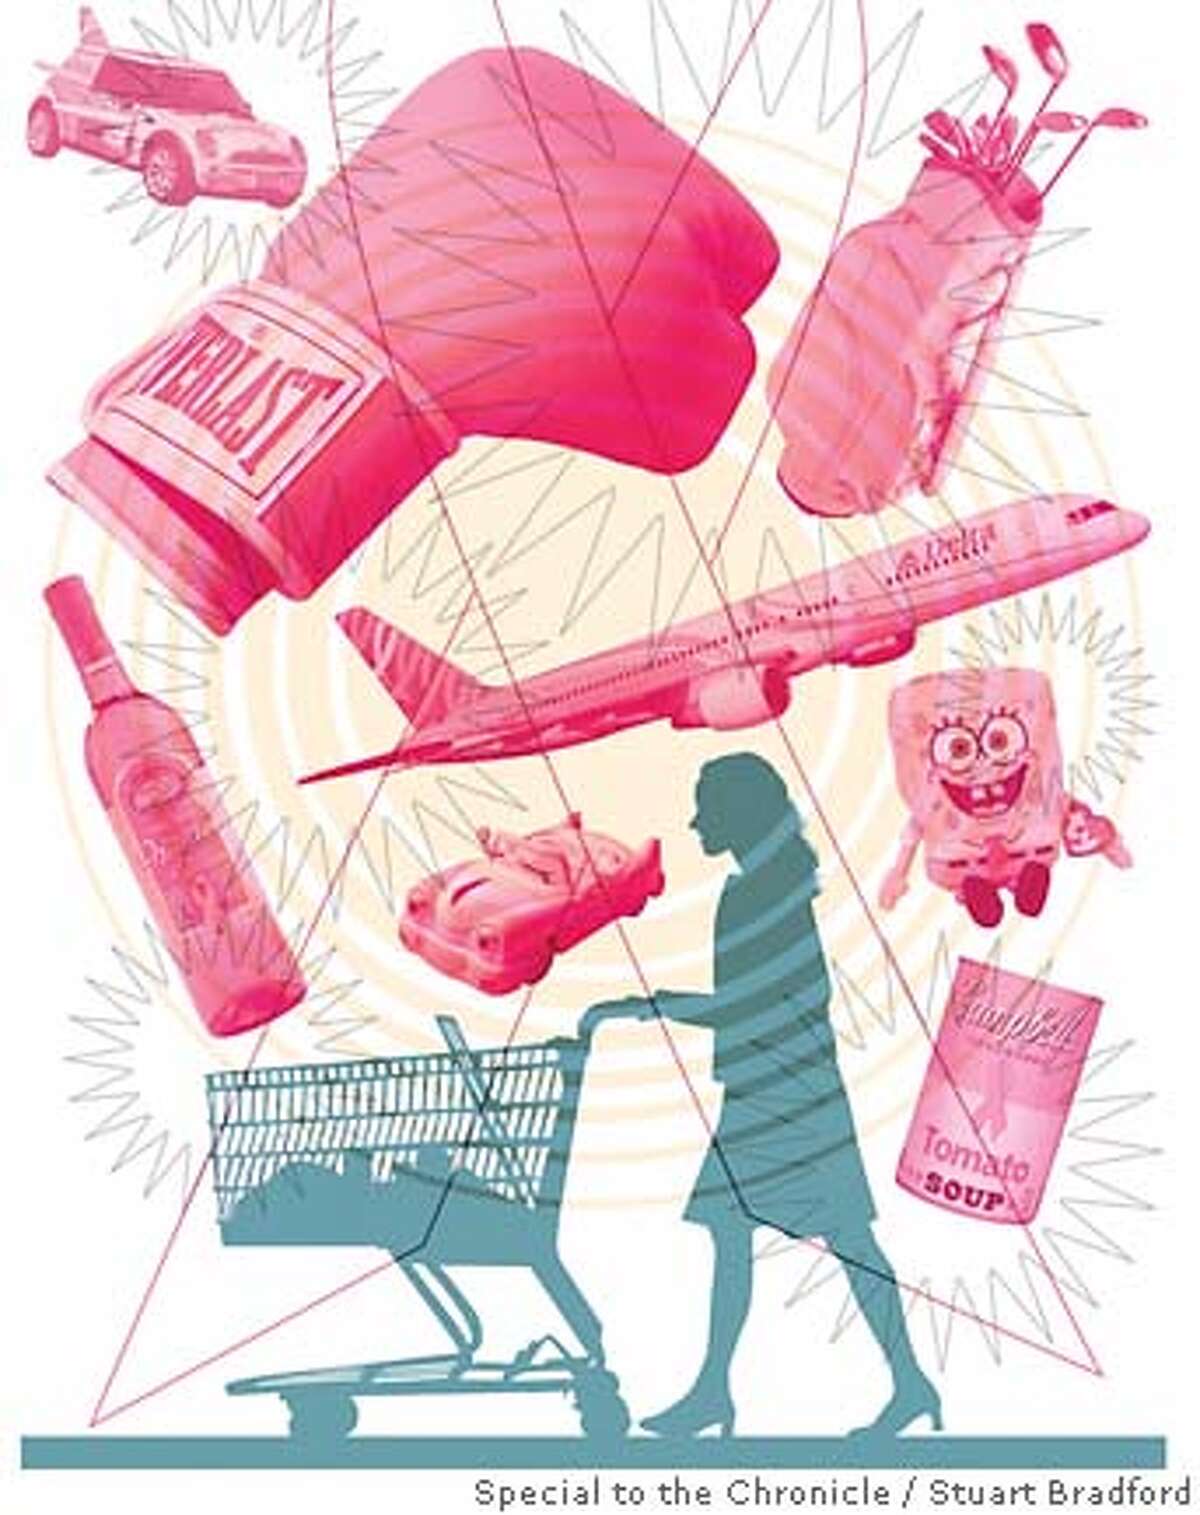 Pinklash! Graphic illustration by Stuart Bradford, special to the Chronicle